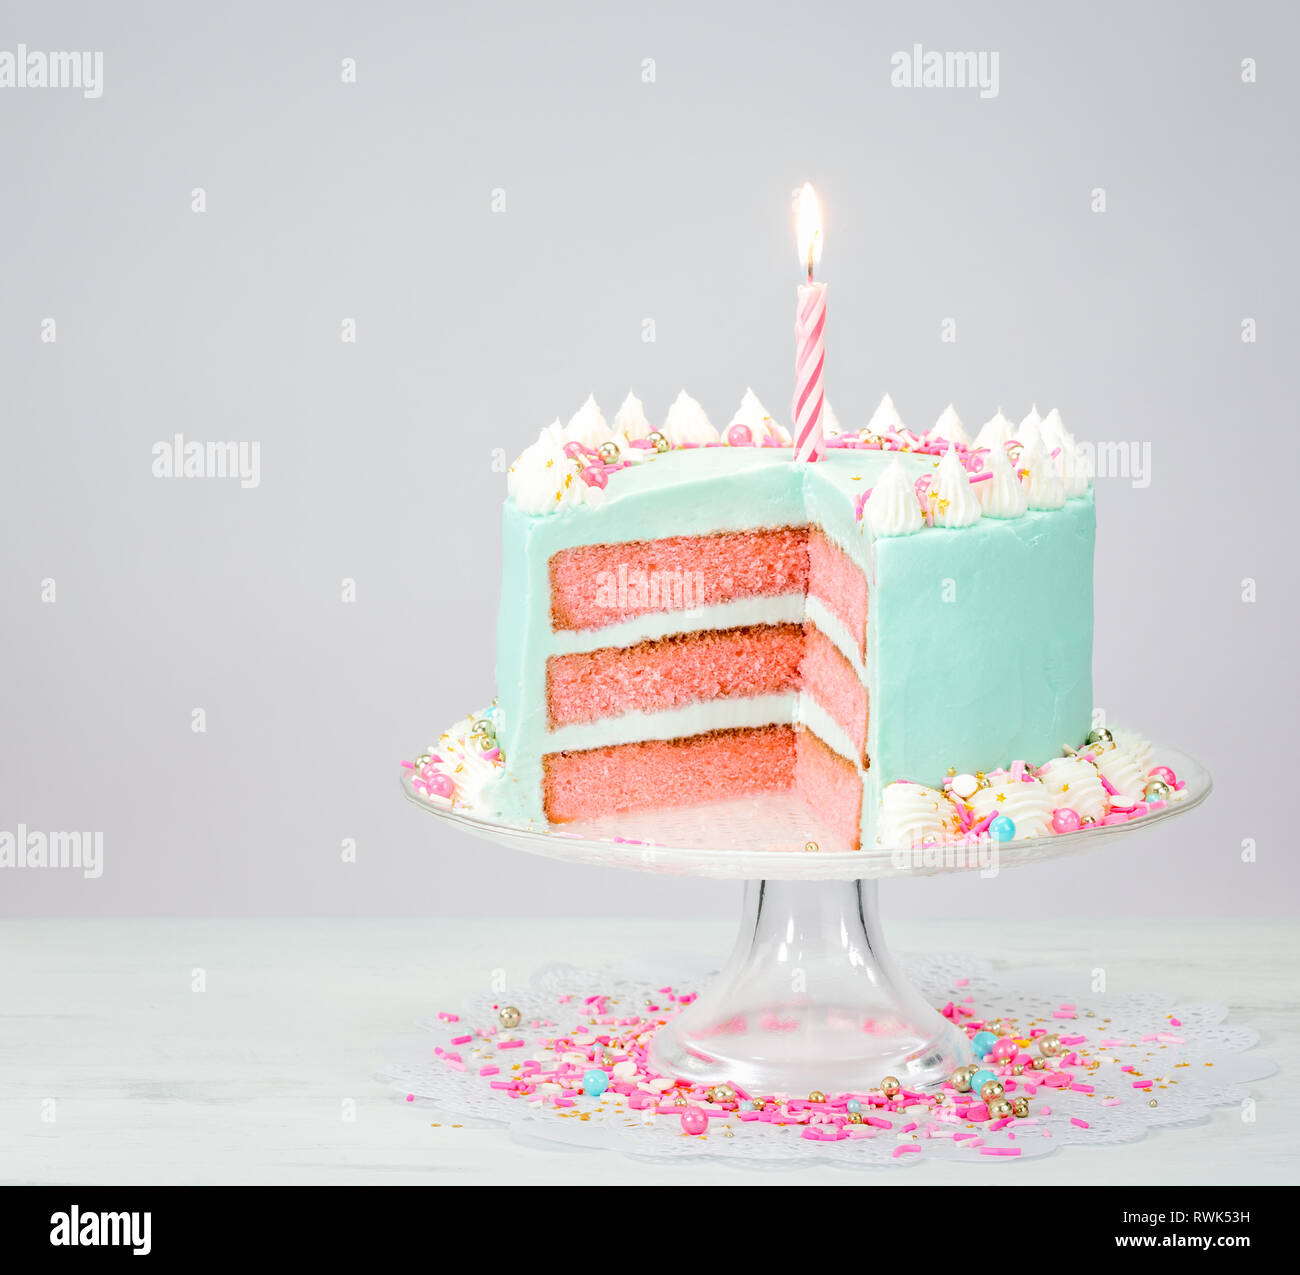 Pastel blue birthday cake over white background with pink layers and sprinkles. Stock Photo